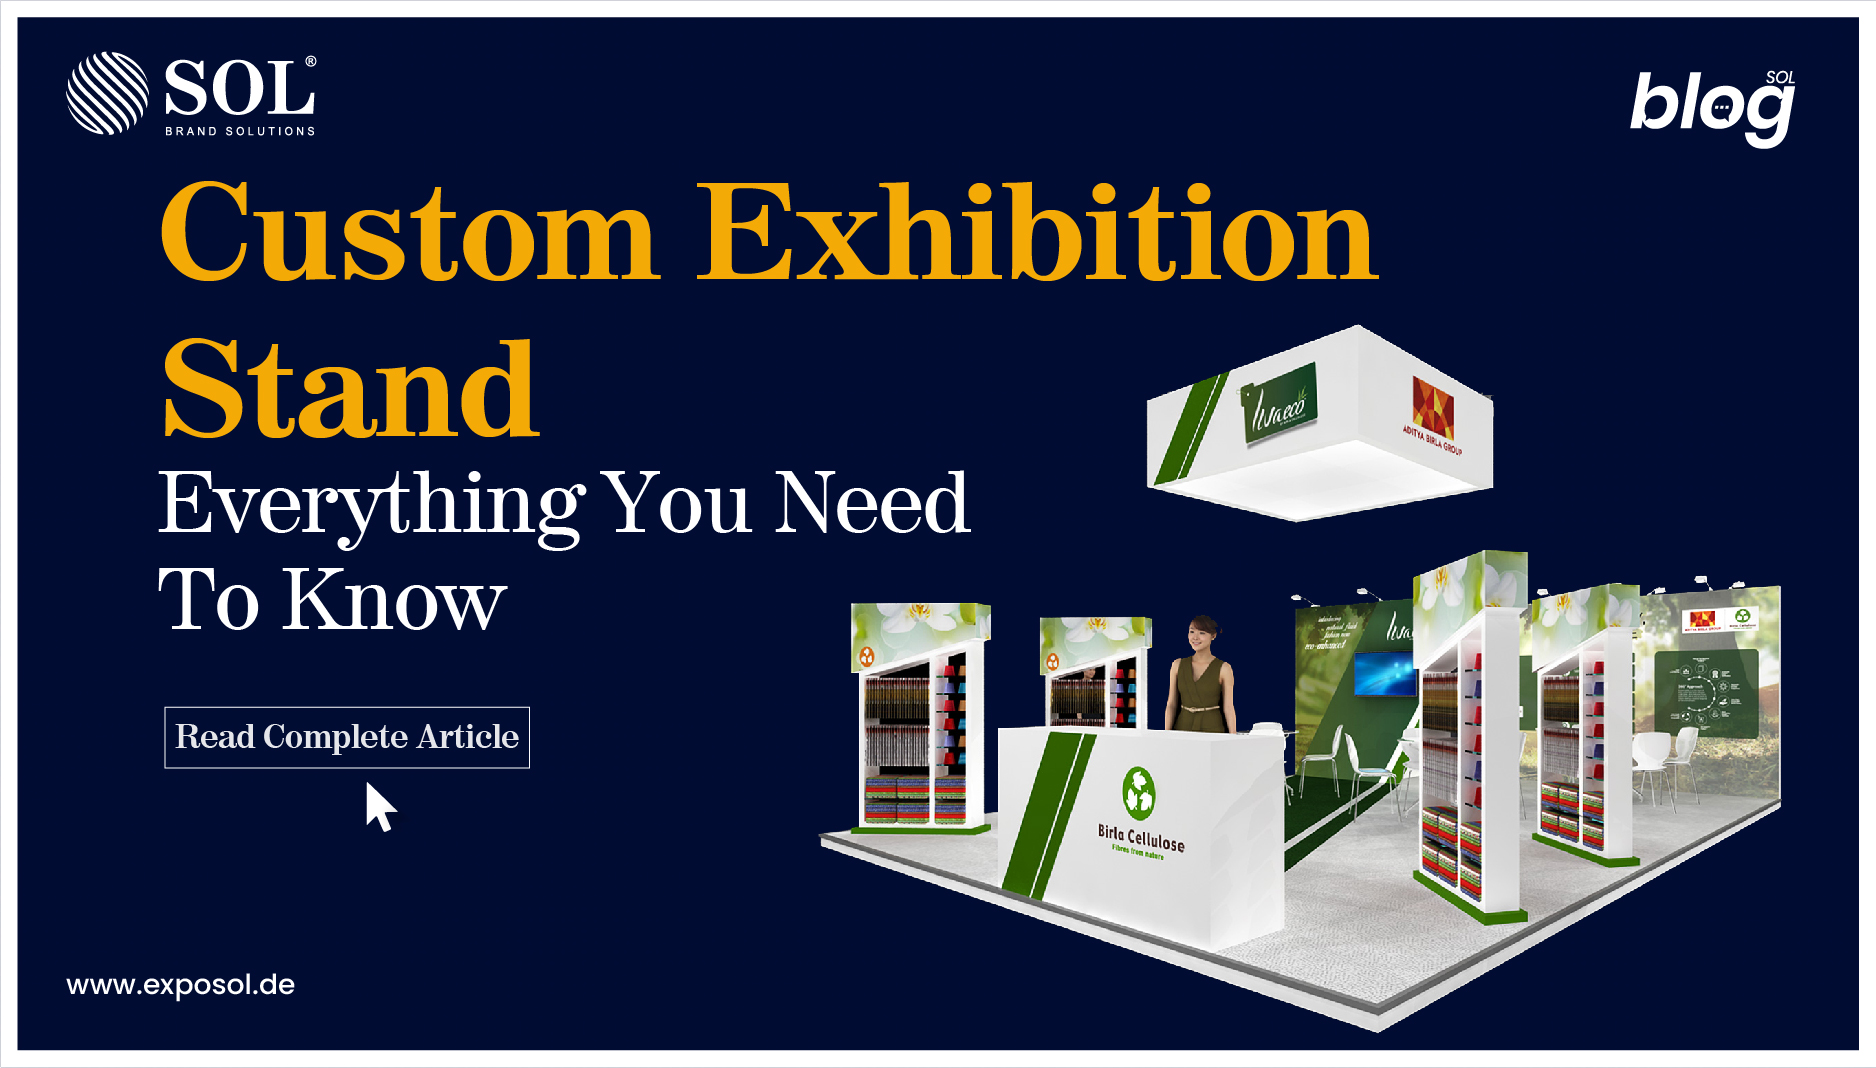 Custom Exhibition Stand in Barcelona 101: Everything You Need To Know